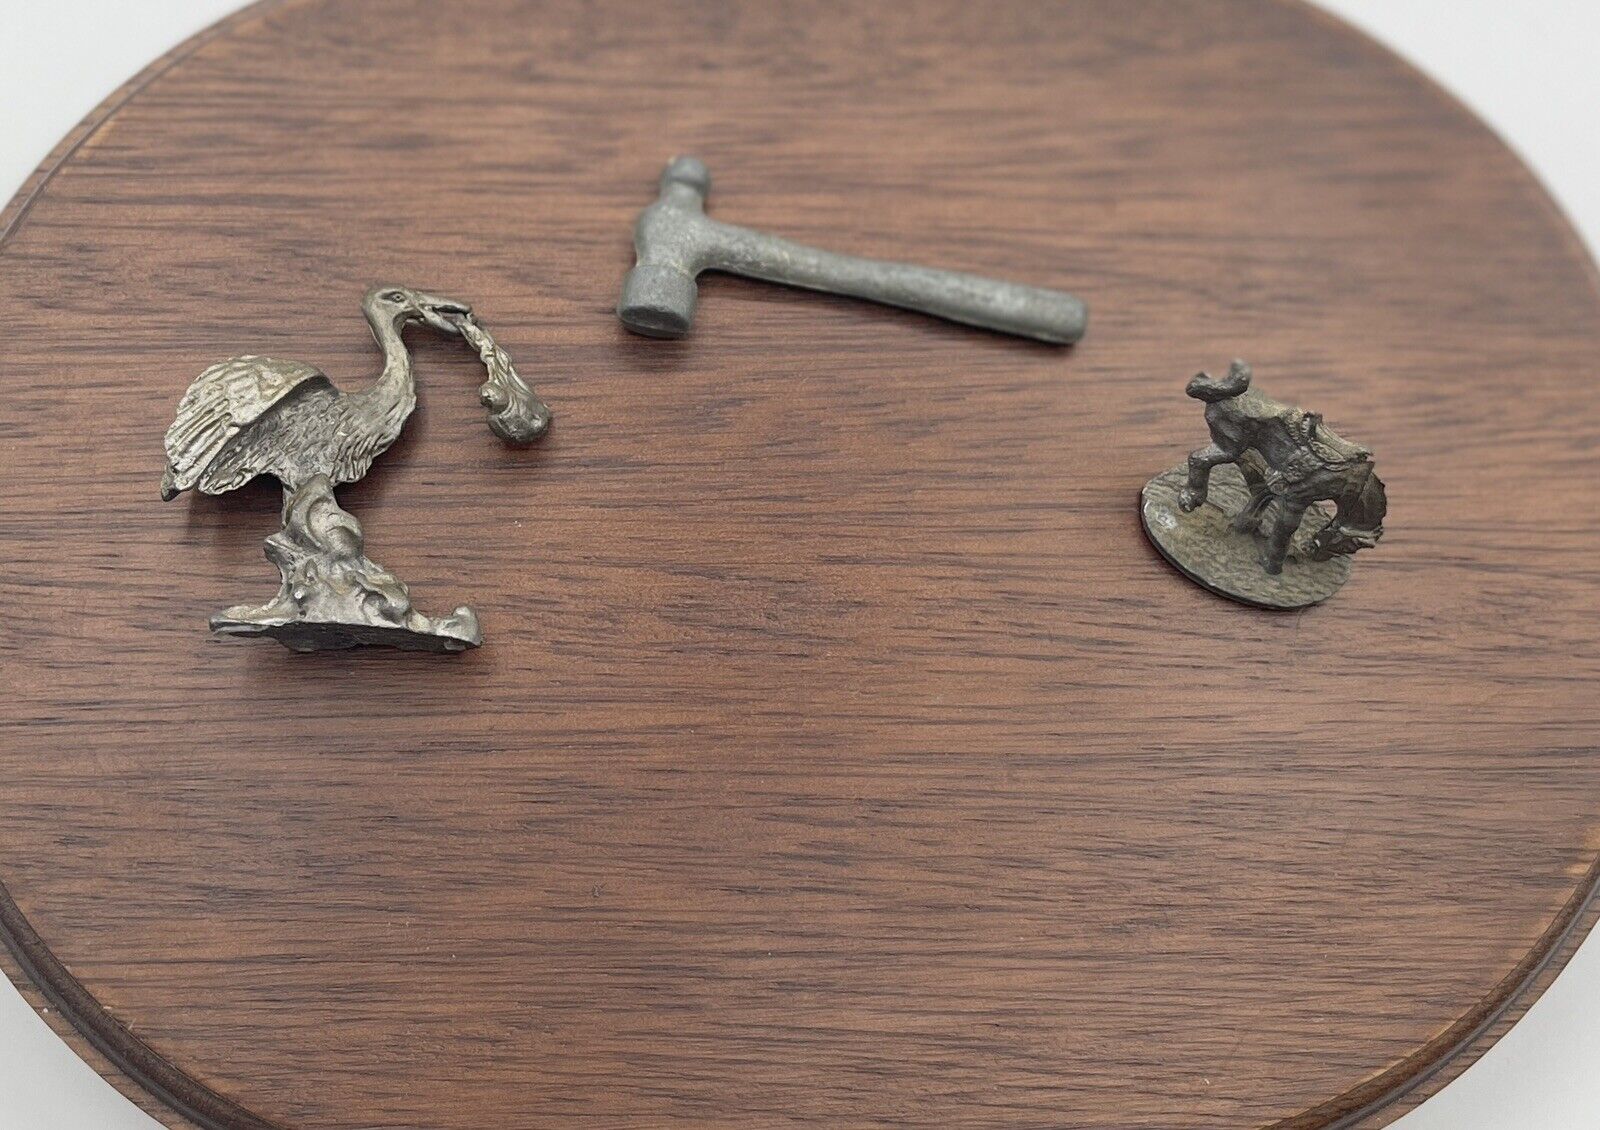 Lot of 3 Pewter Miniature Figurines Stork with Wrapped Baby, Hammer, Horse